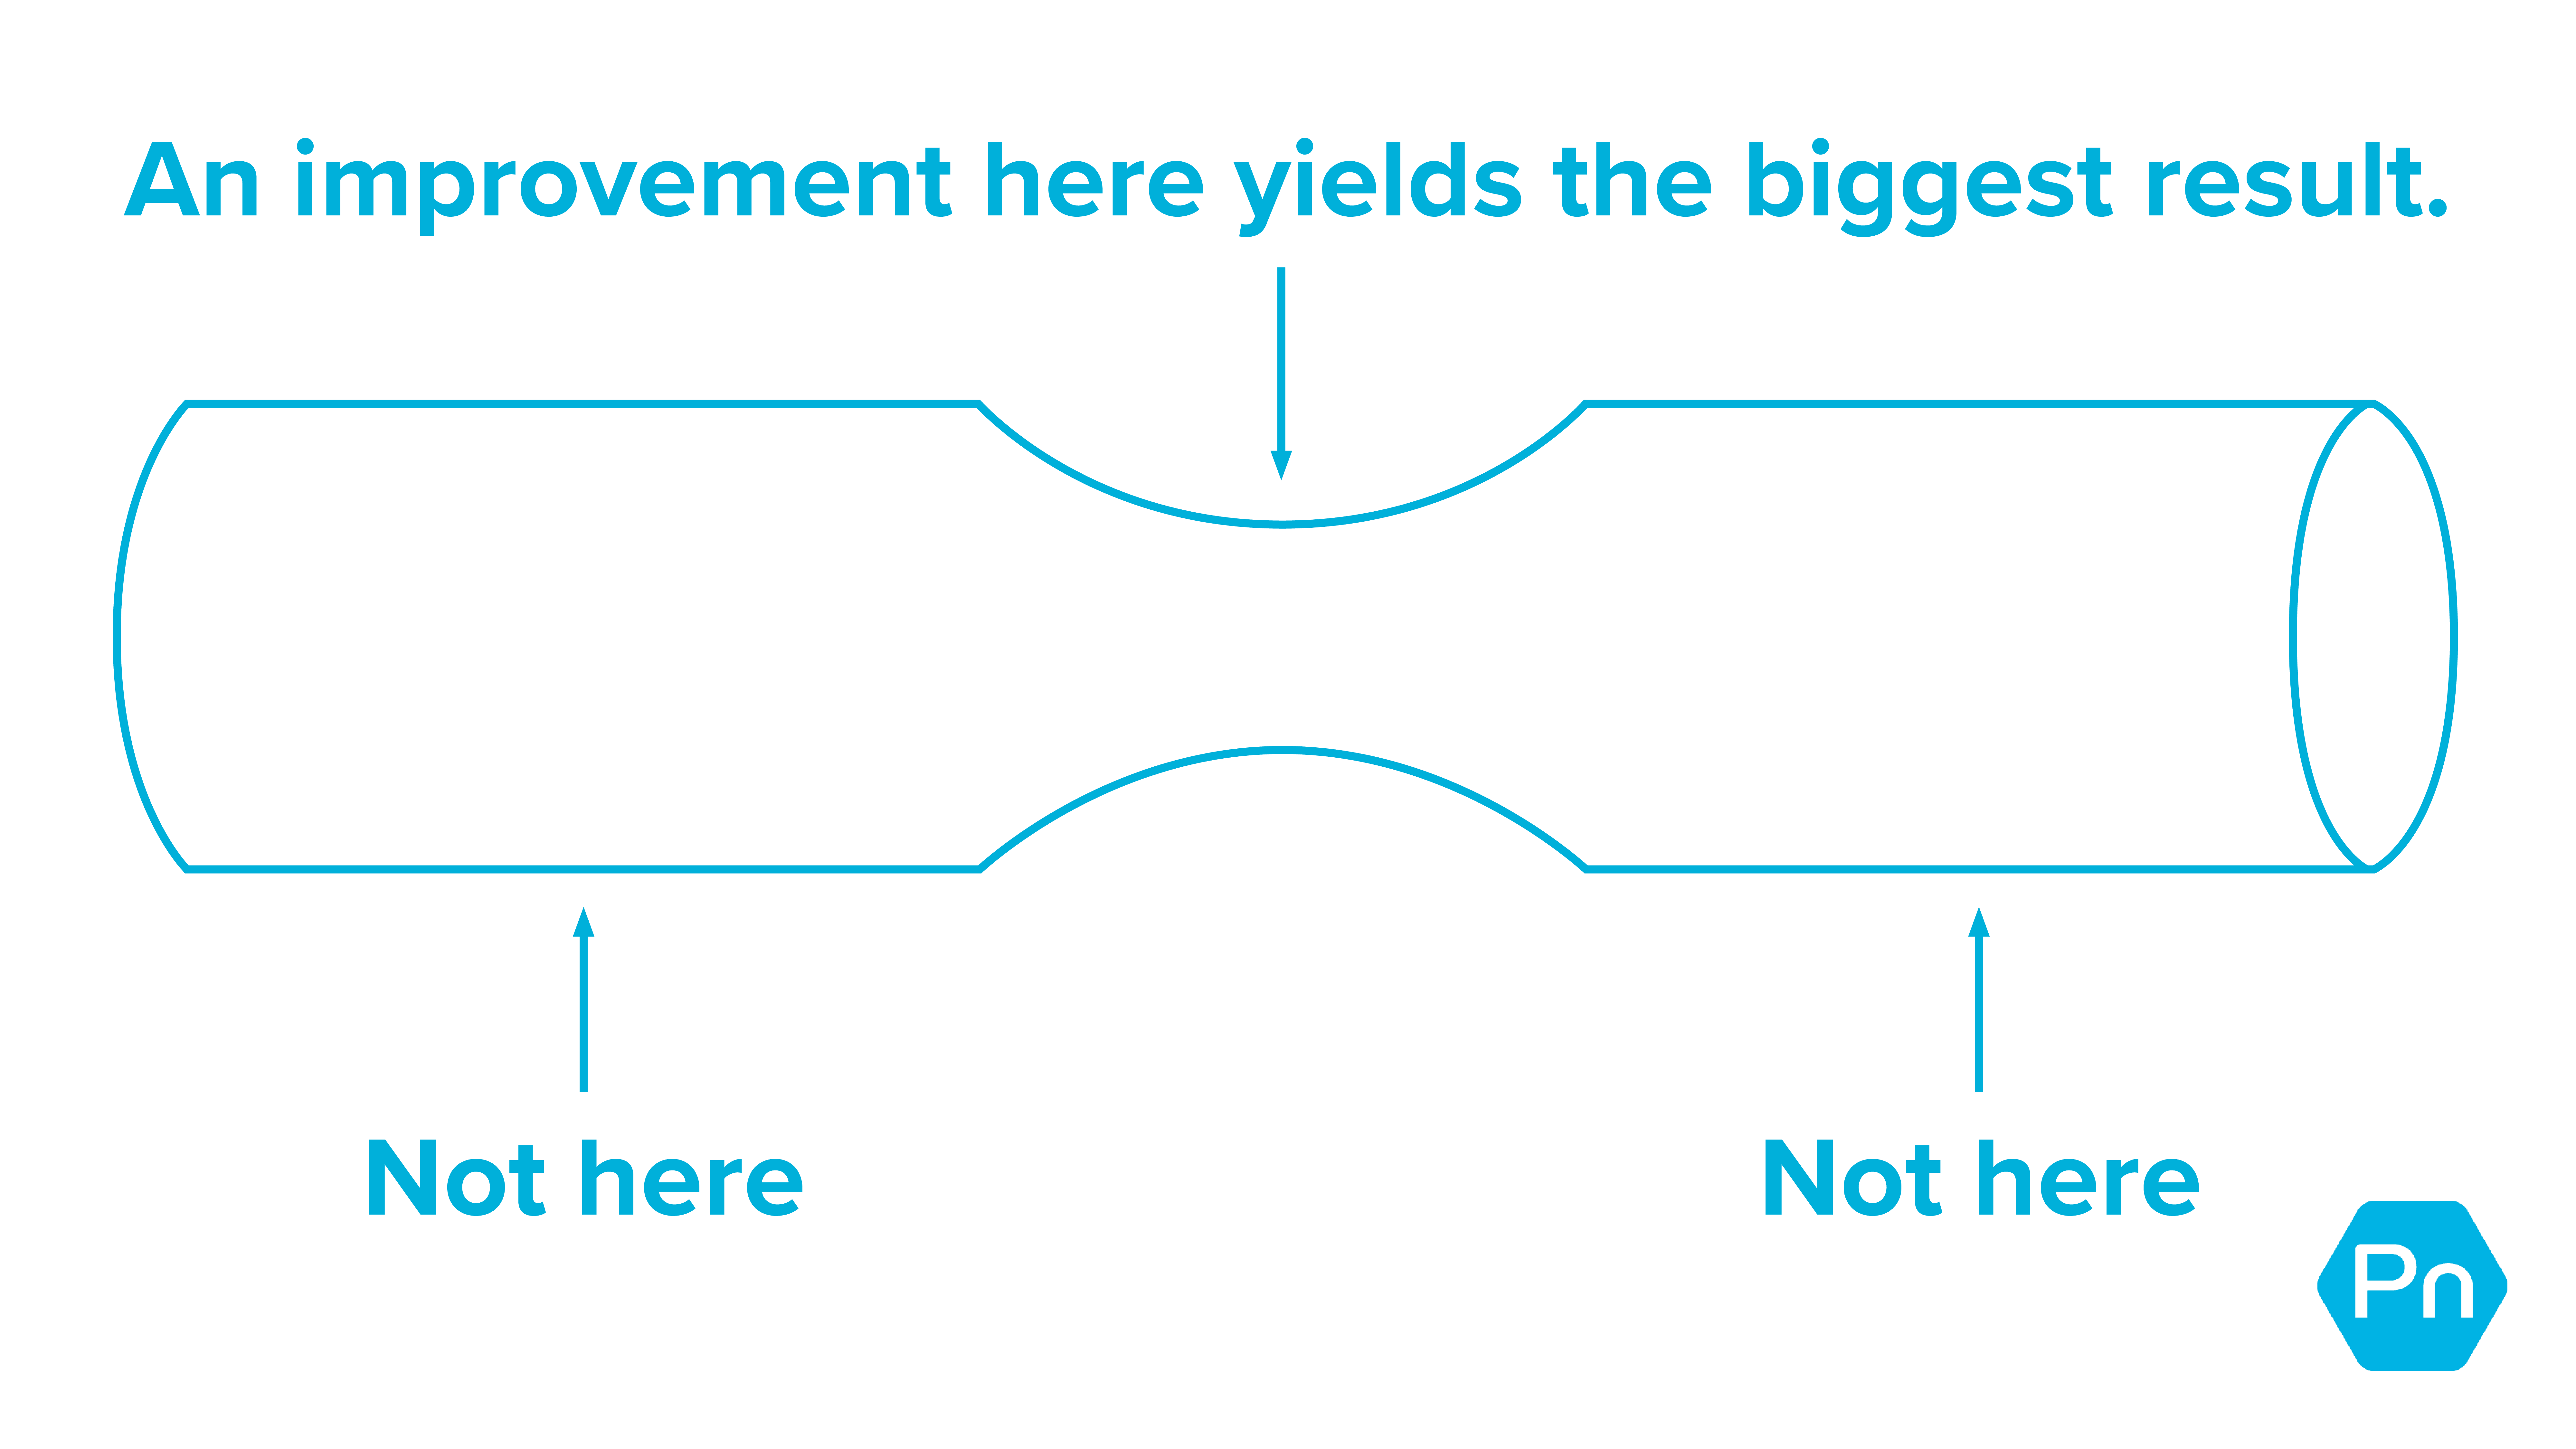 Graphical depiction of a bottleneck. The graphic shows a tube with a narrower section in the middle of it. An arrow points to the narrower section with the text: "An improvement here yields the biggest result." 